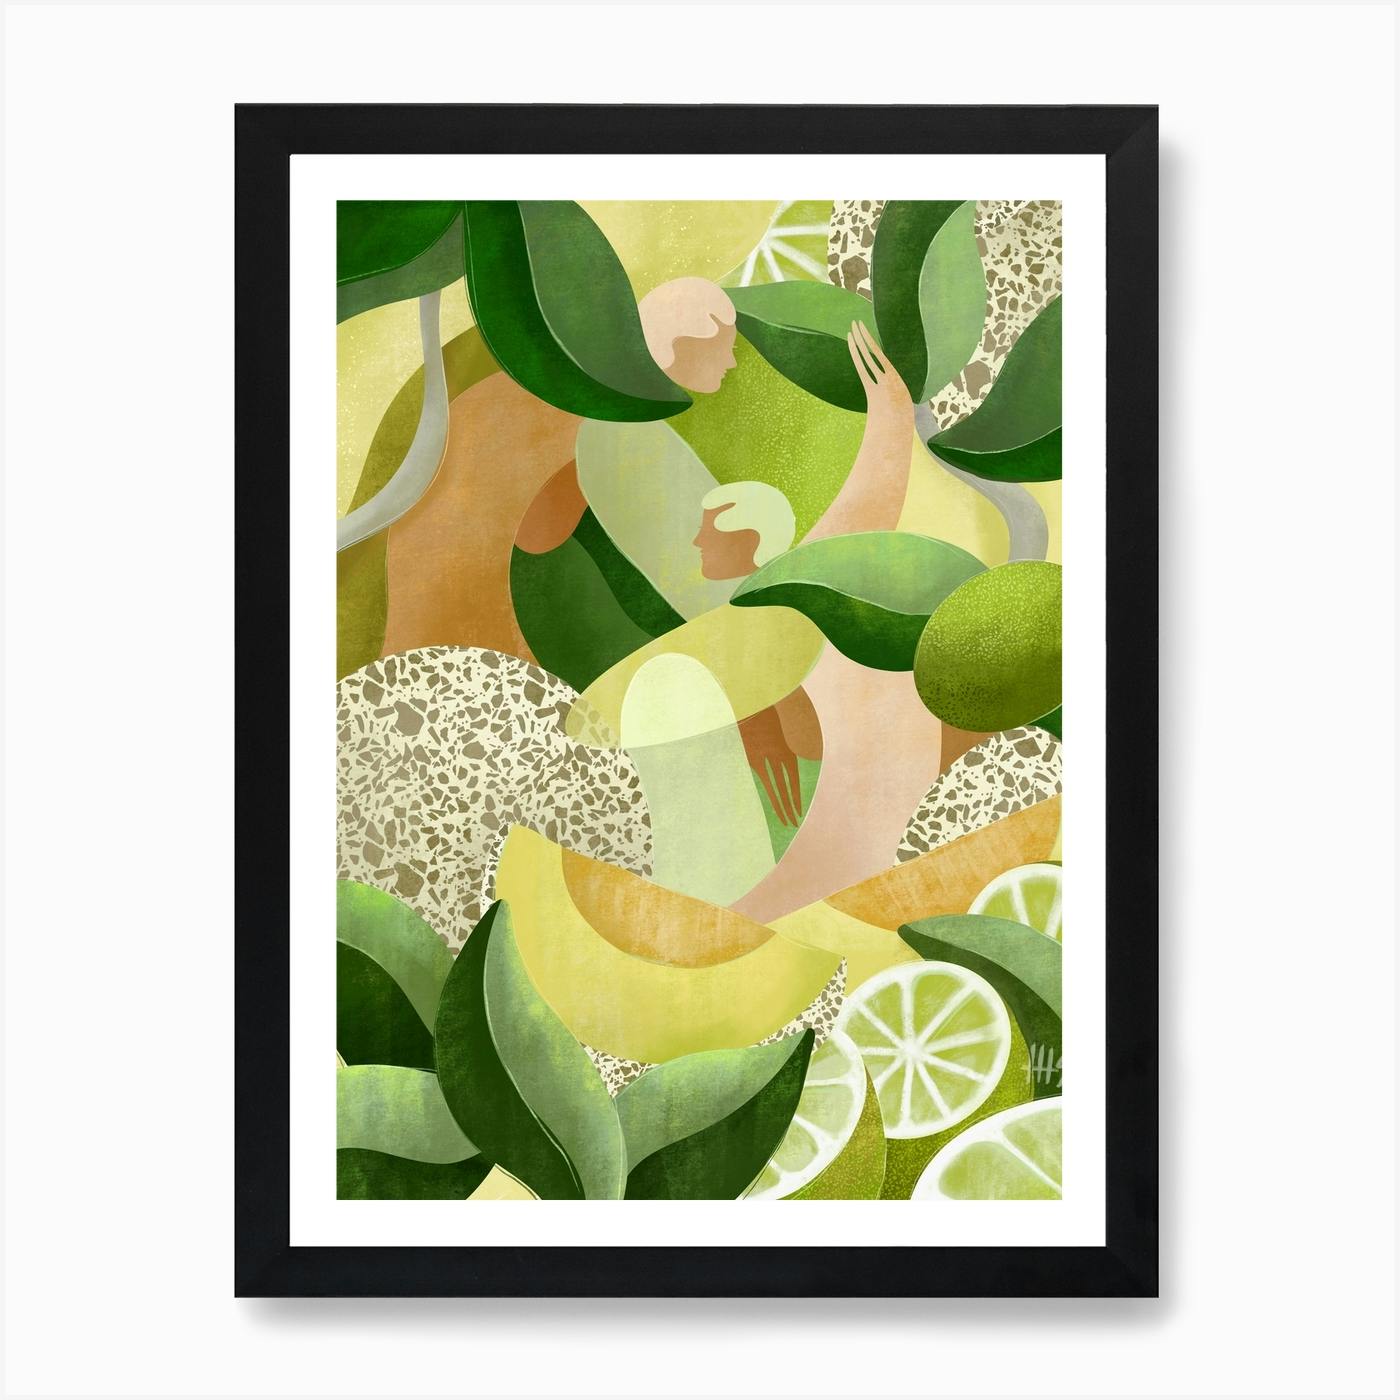 Photo Picture Poster Print Art A0 A1 A2 A3 A4 AE397 LEMON AND MINT 